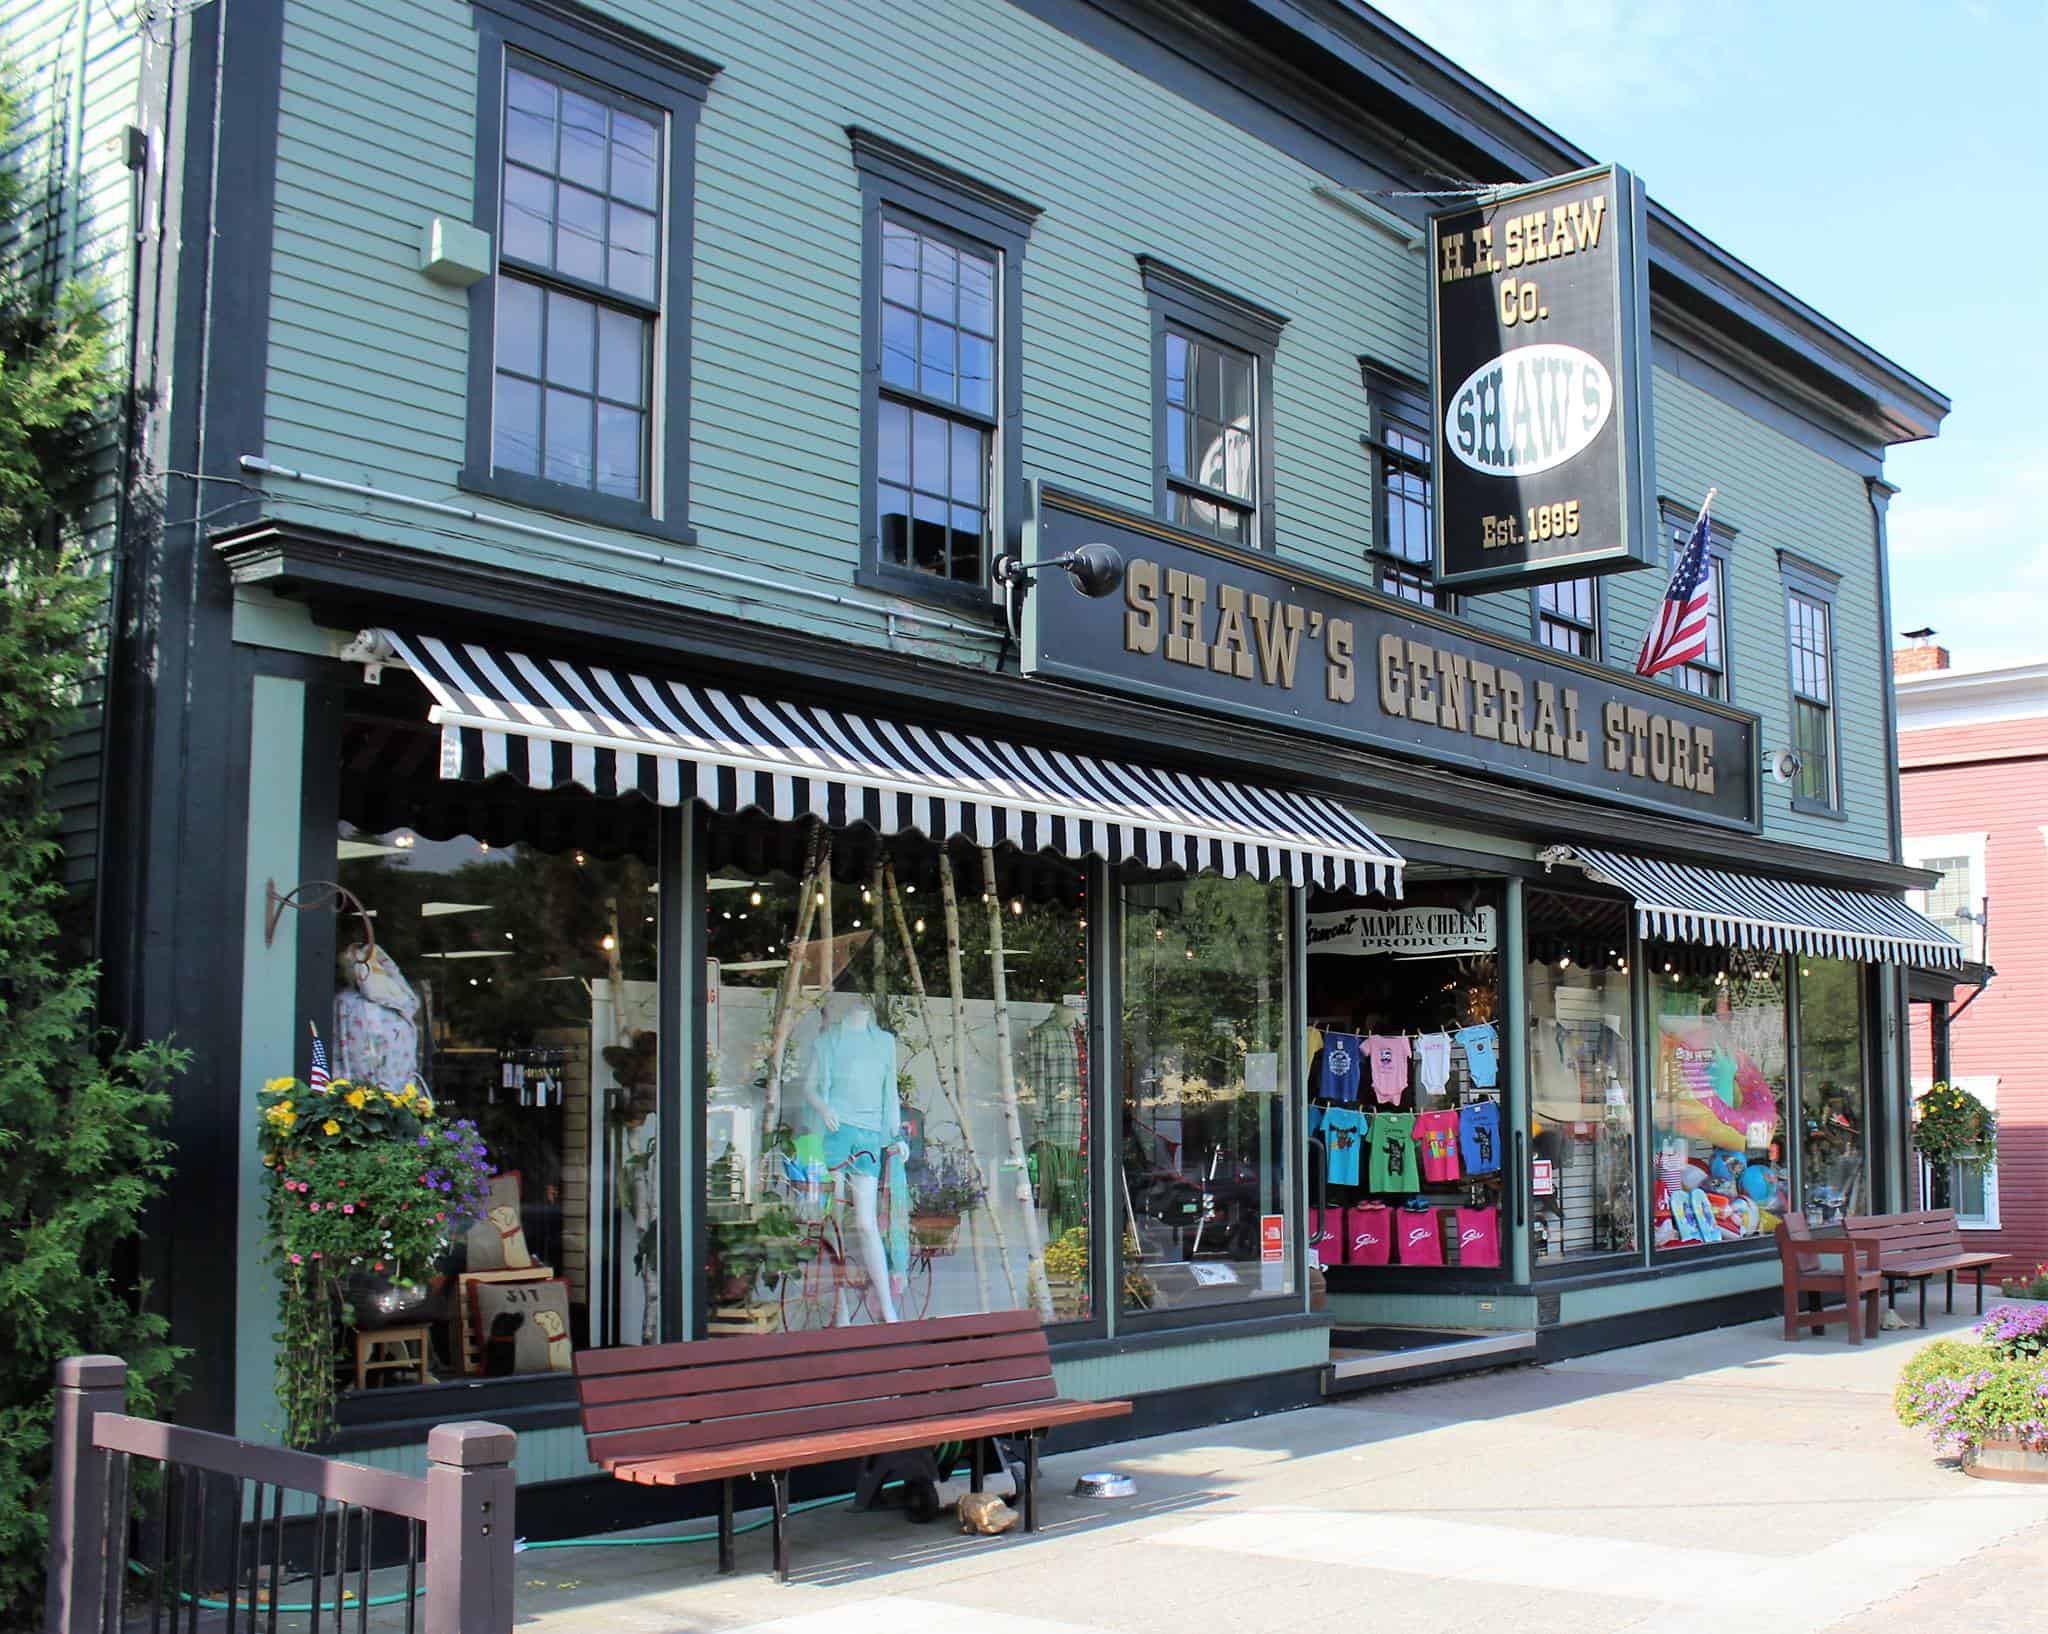 Shaw's General Store - Summer Exterior